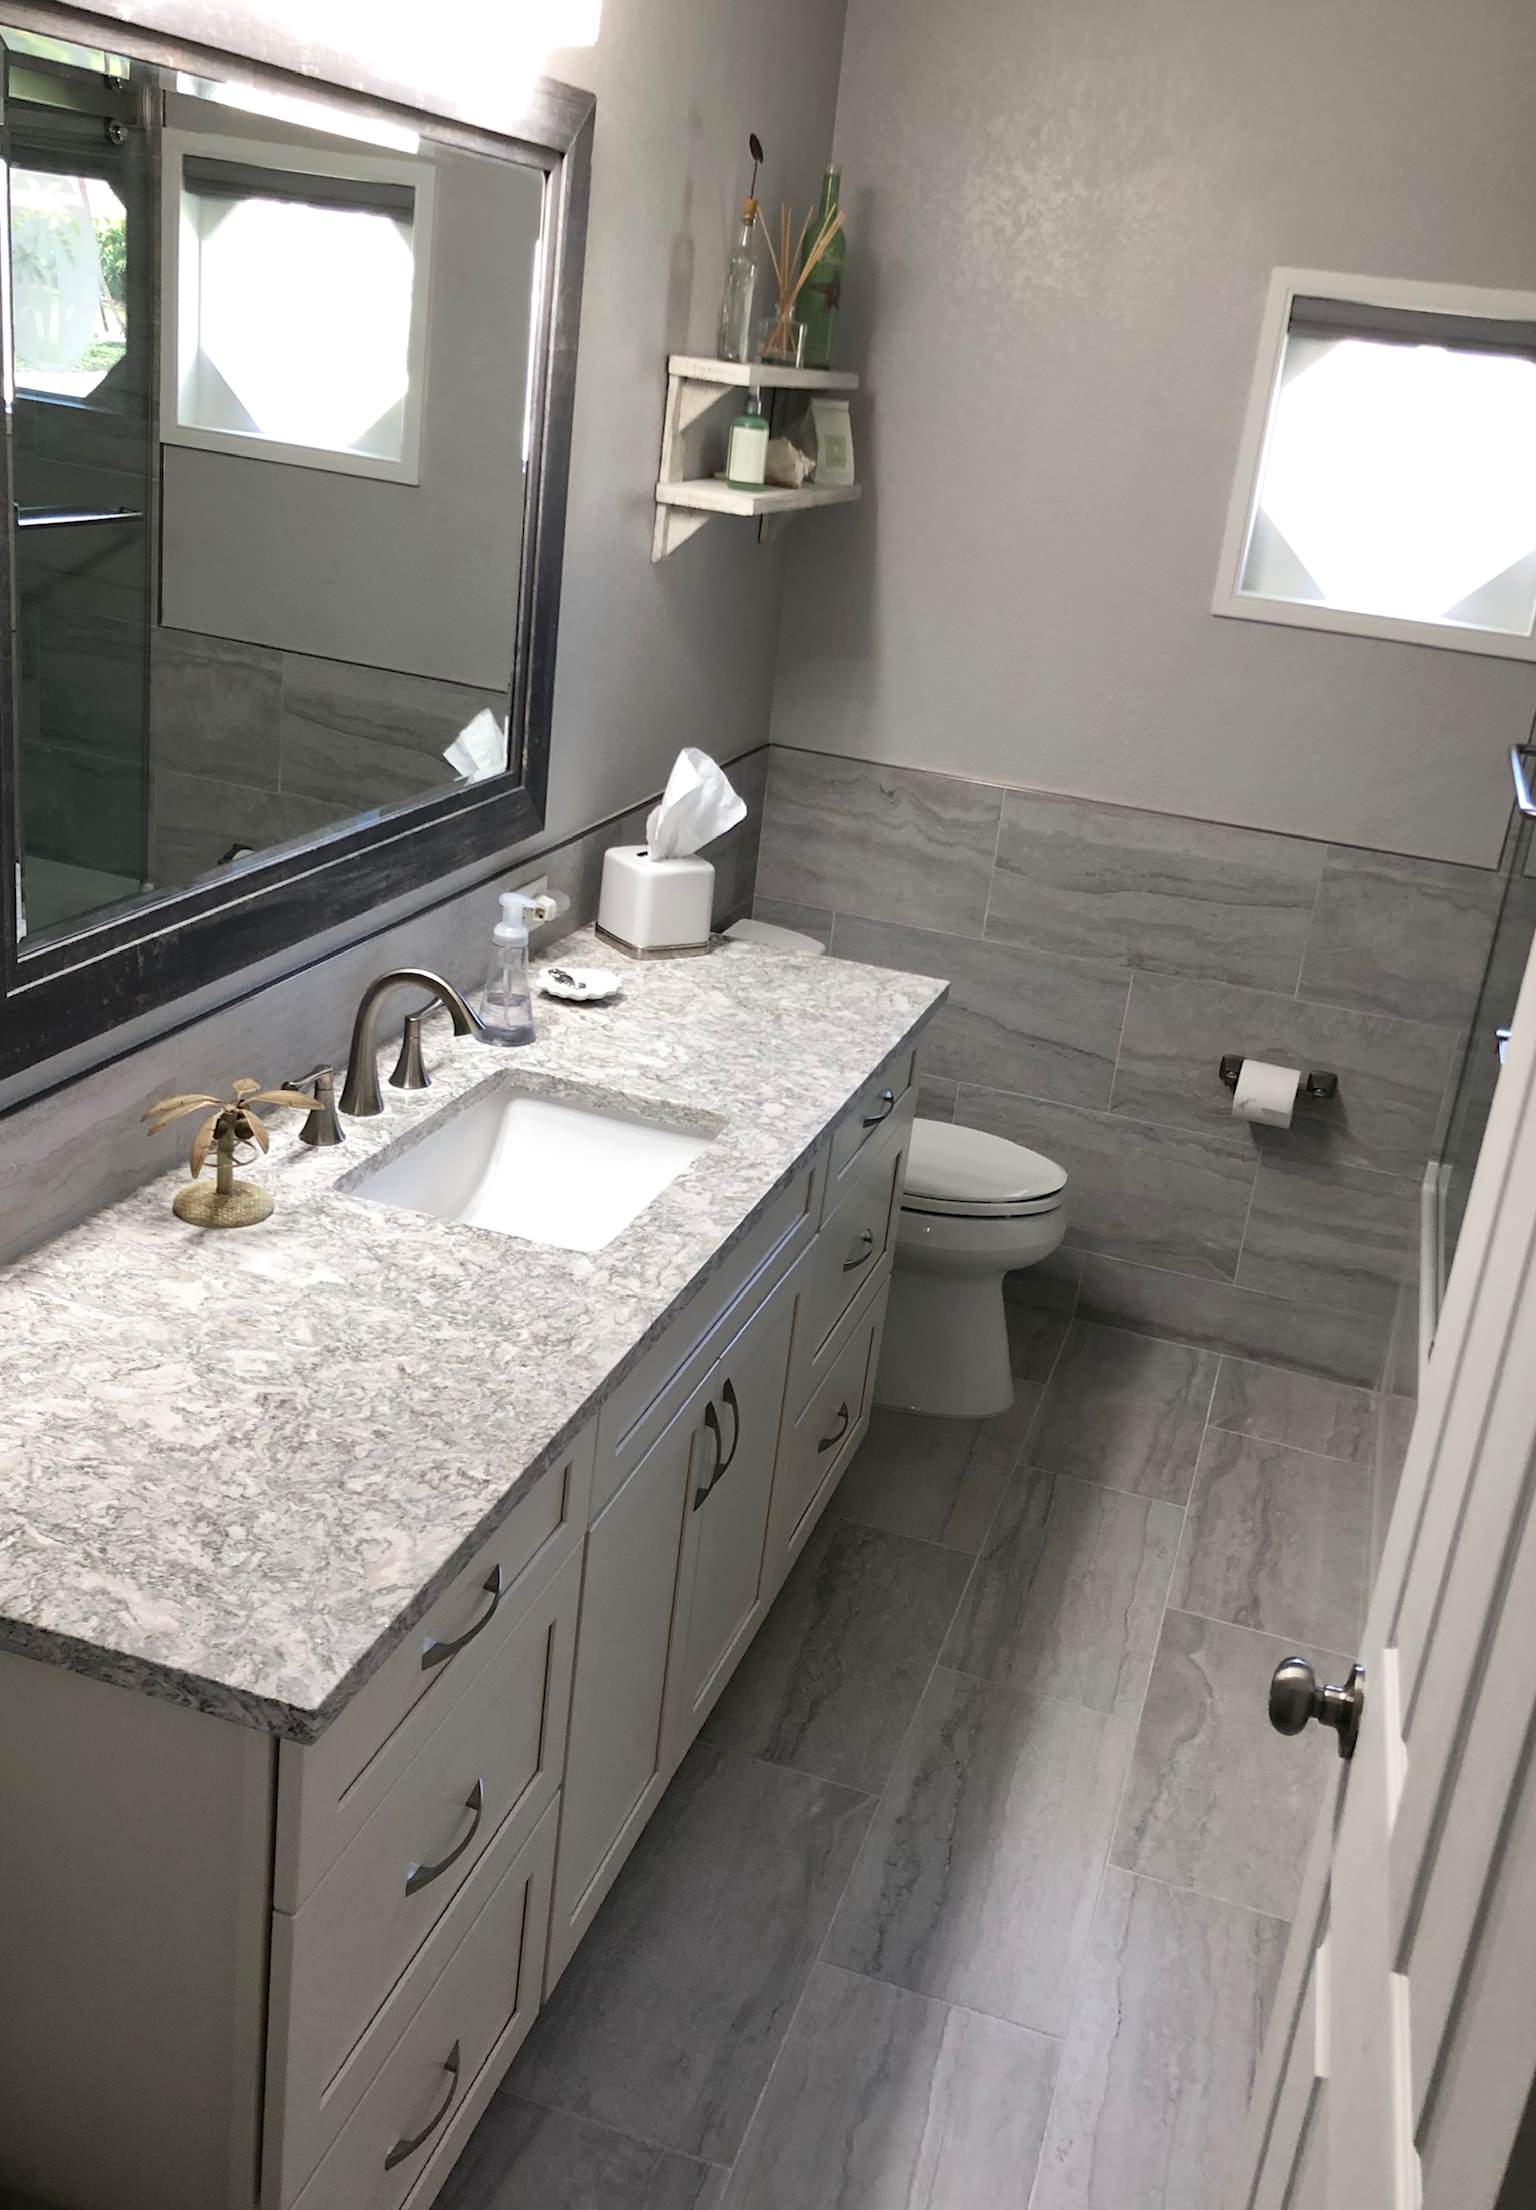 Gray Cabinets And Granite Countertops, White Bathroom Vanity With Grey Granite Top Dining Table